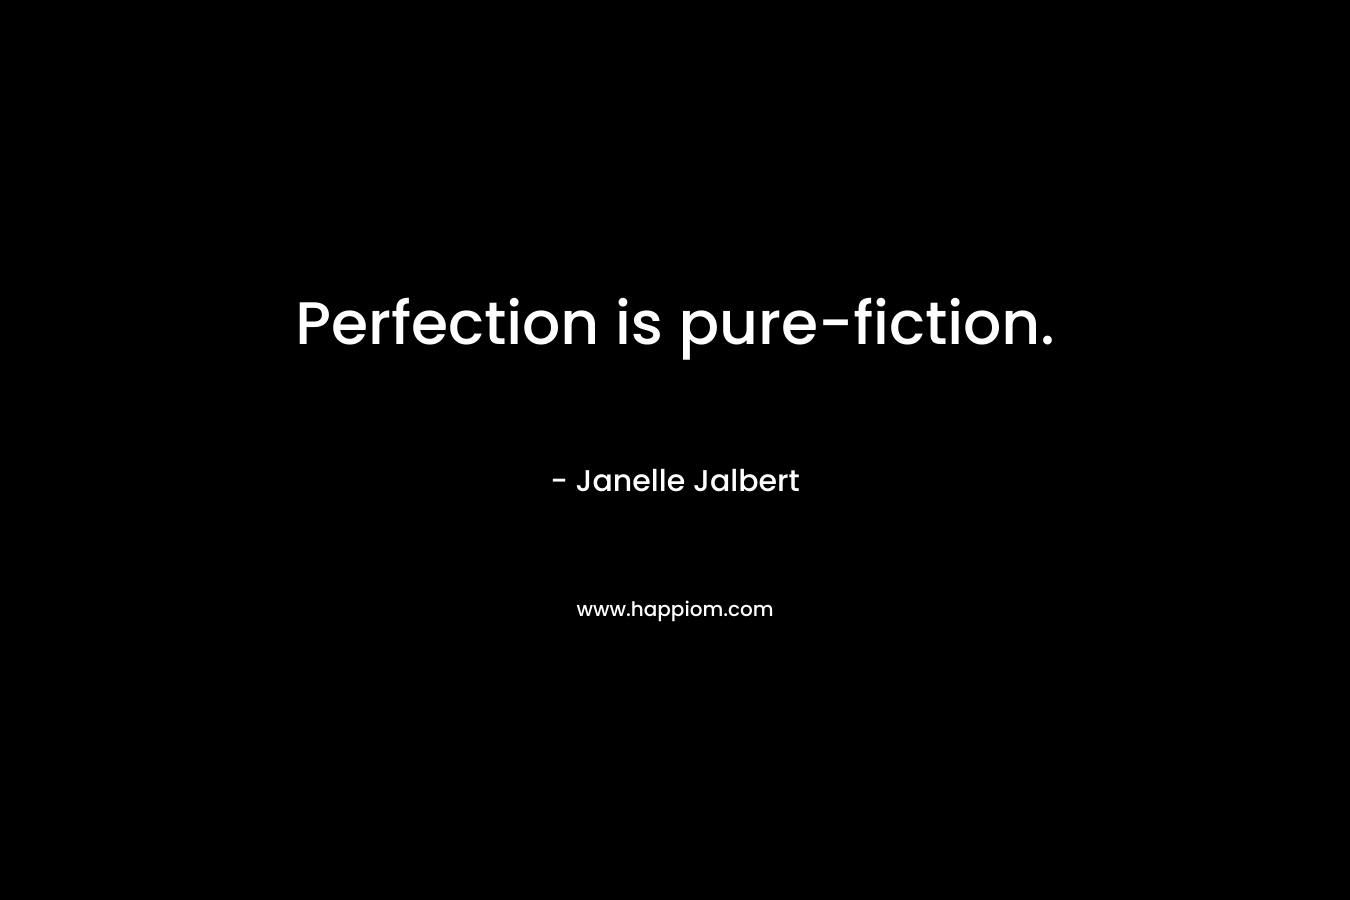 Perfection is pure-fiction. – Janelle Jalbert